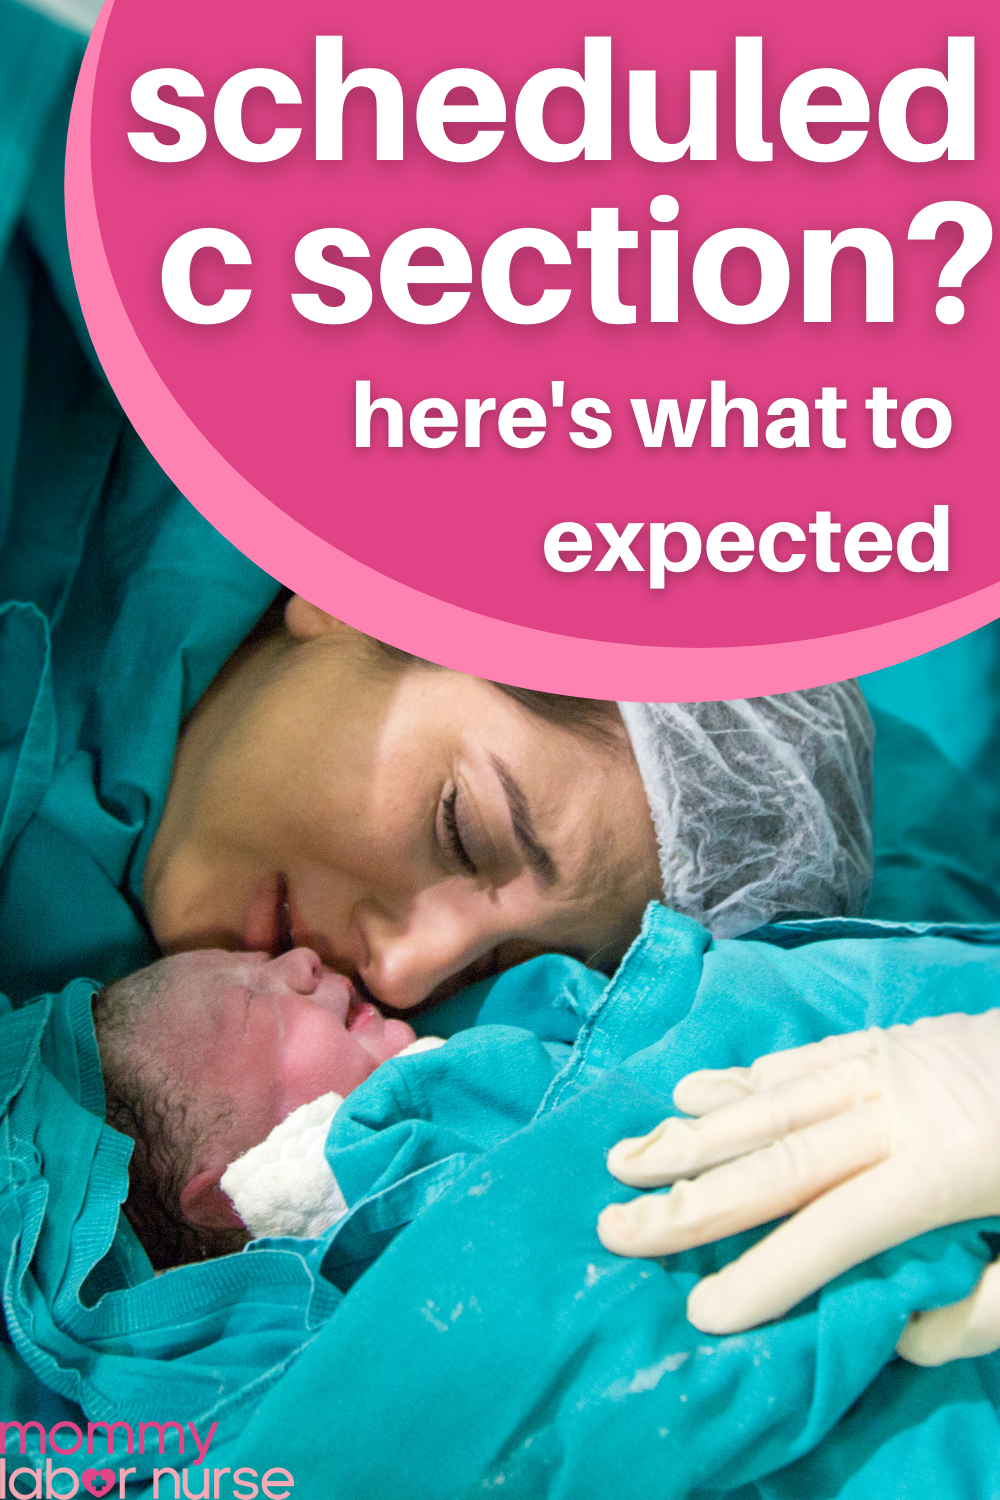 scheduled c section, what to expect c section